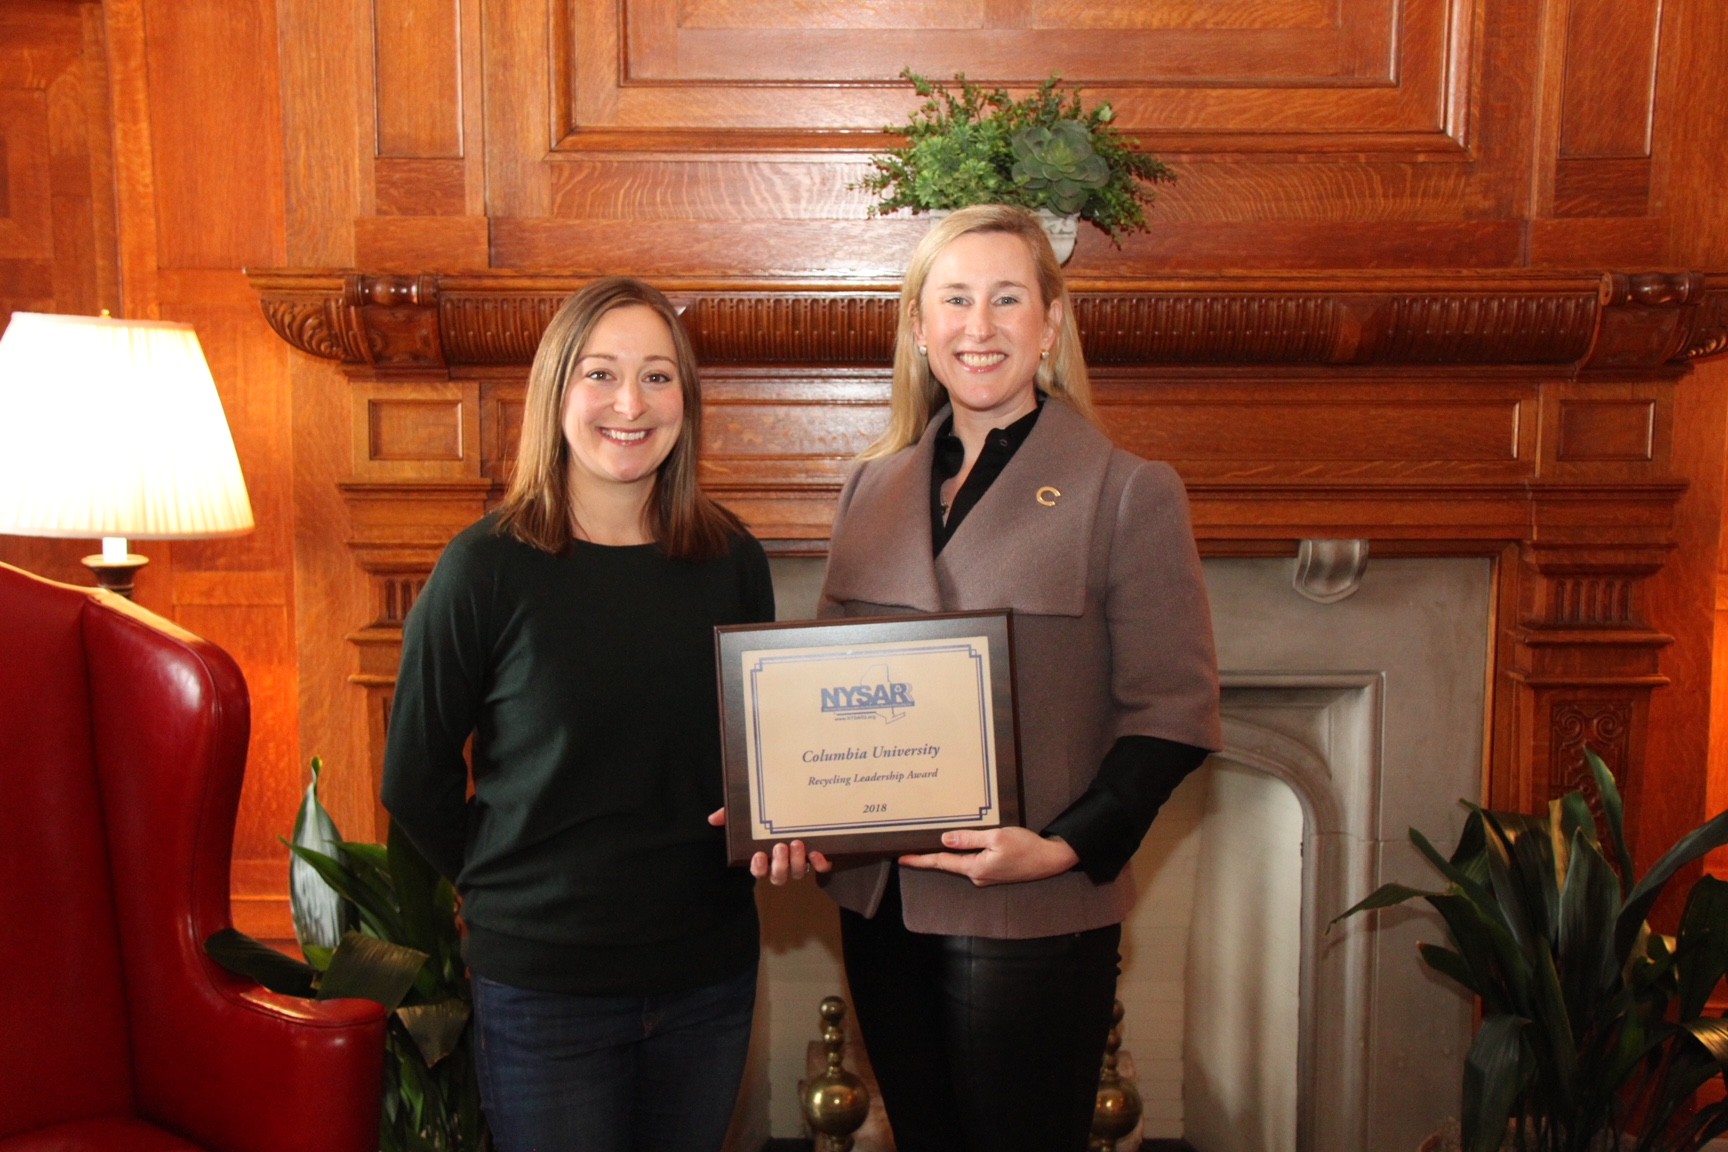 Jessica Prata, Assistant Vice President of Environmental Stewardship for Columbia University, (right) is presented with the 2018 Recycling Leadership Award-College or University by NYSAR3 President Kelli Timbrook.